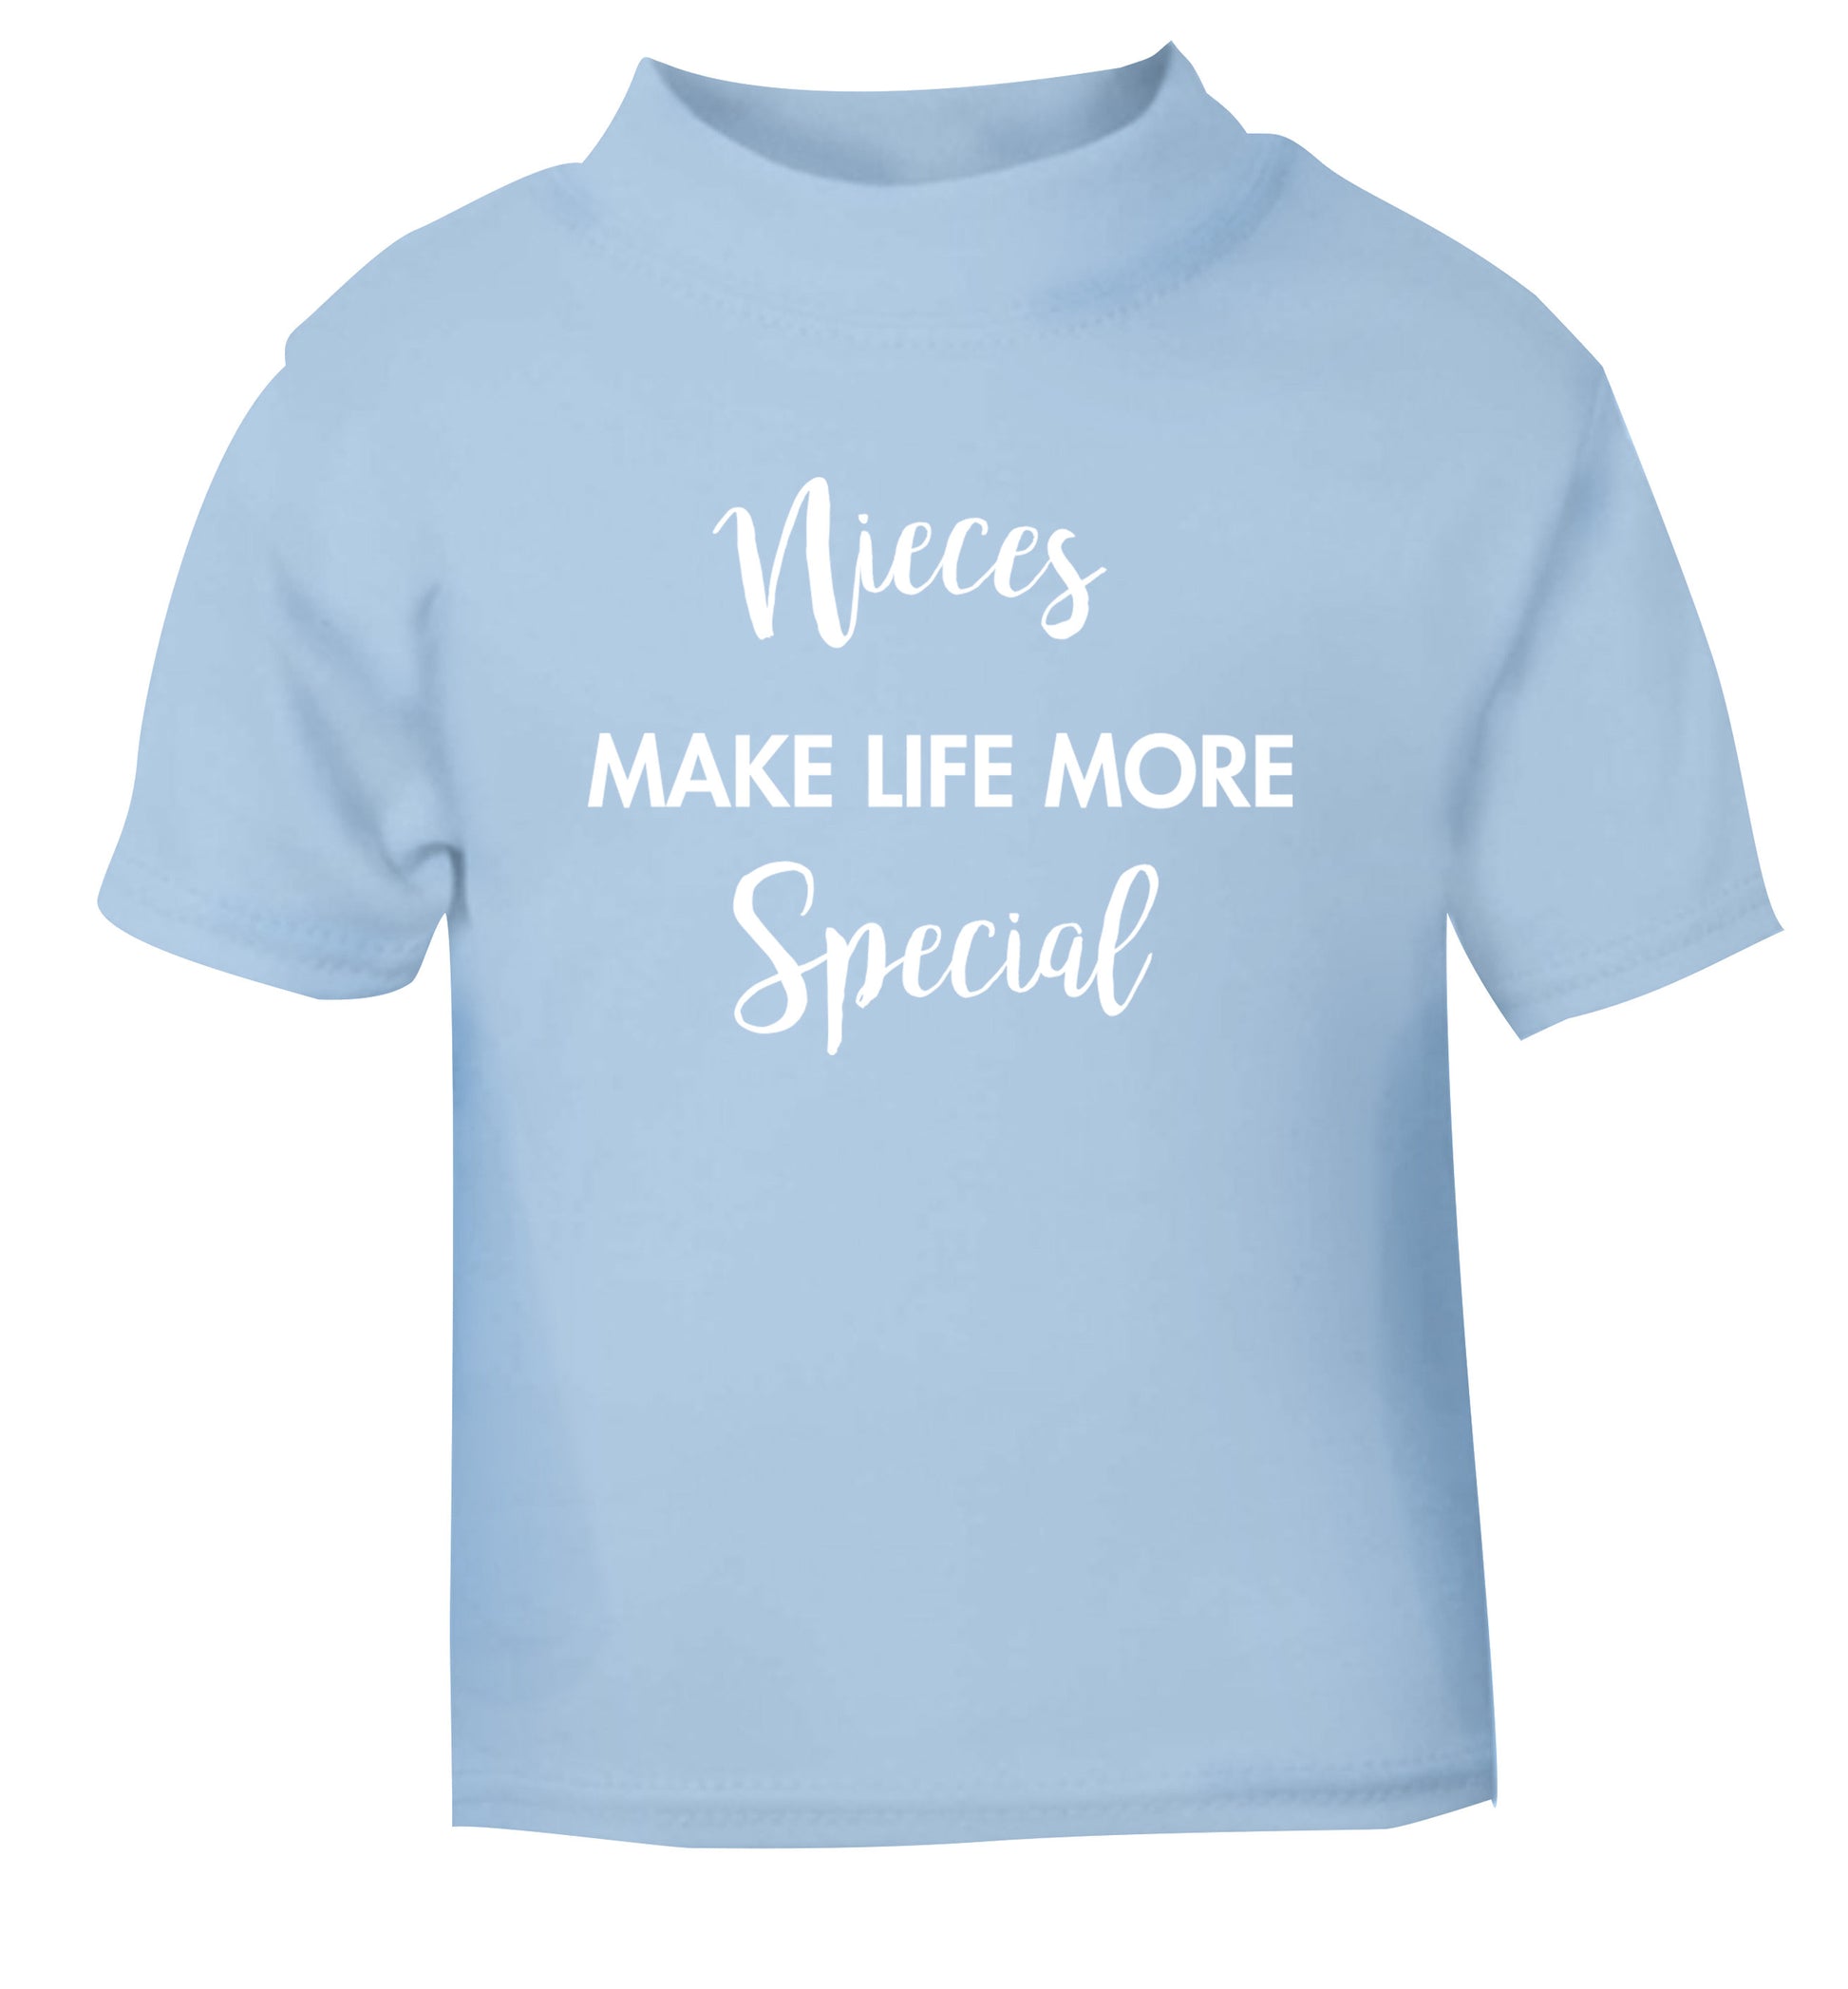 Nieces make life more special light blue Baby Toddler Tshirt 2 Years